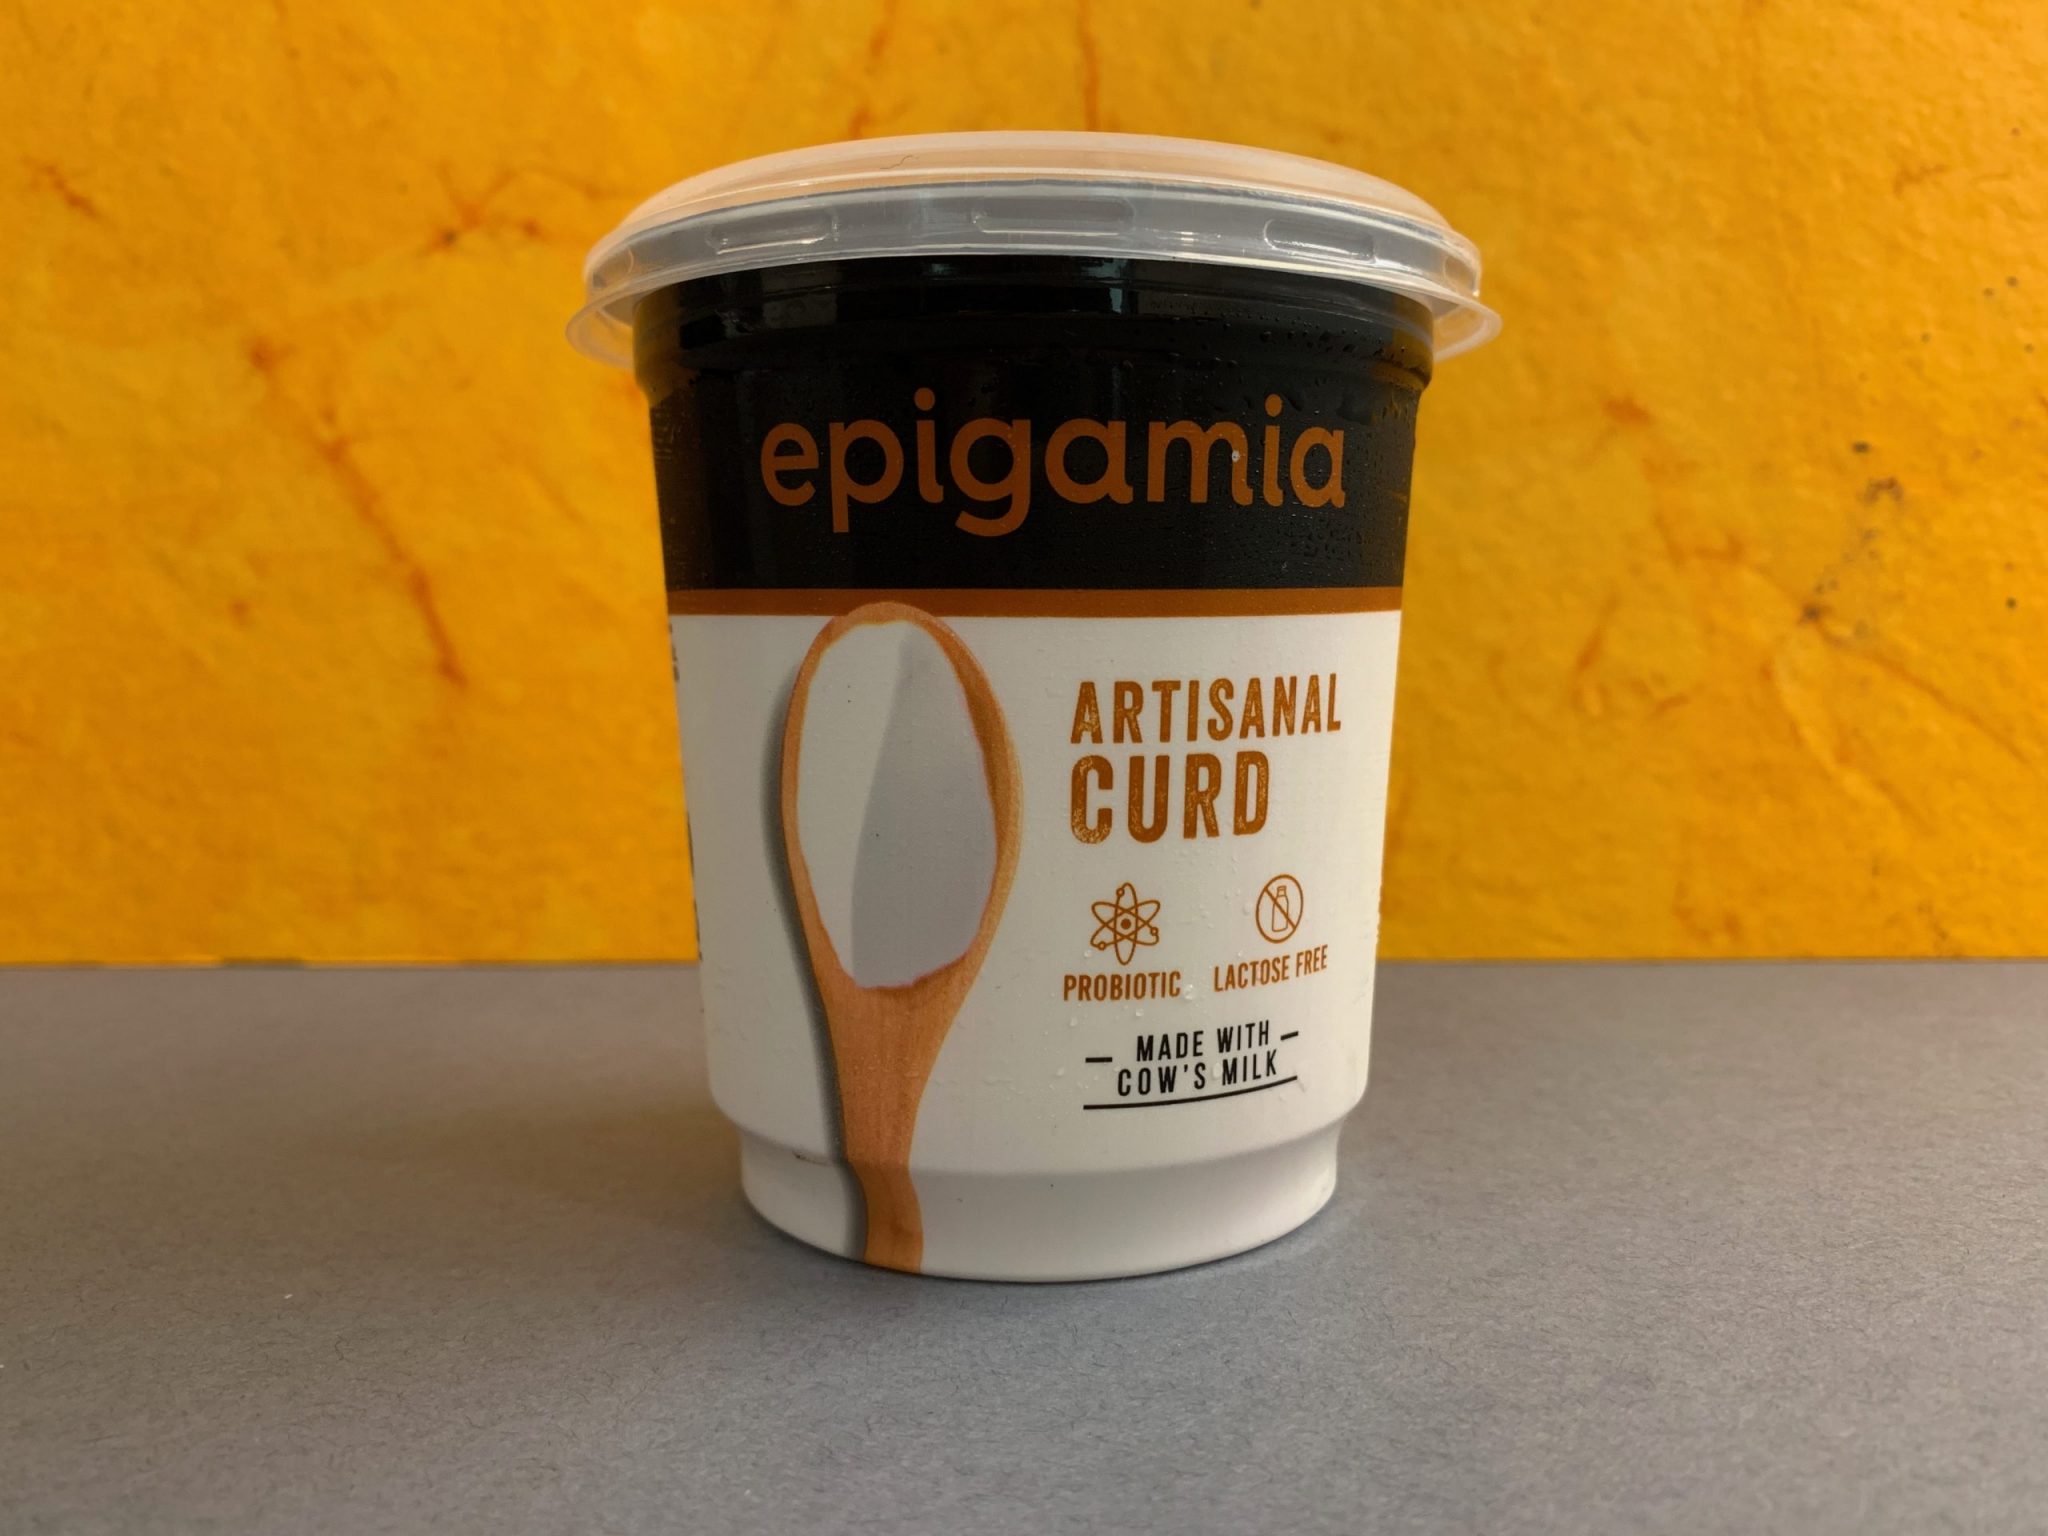 Epigamia Artisanal Curd review